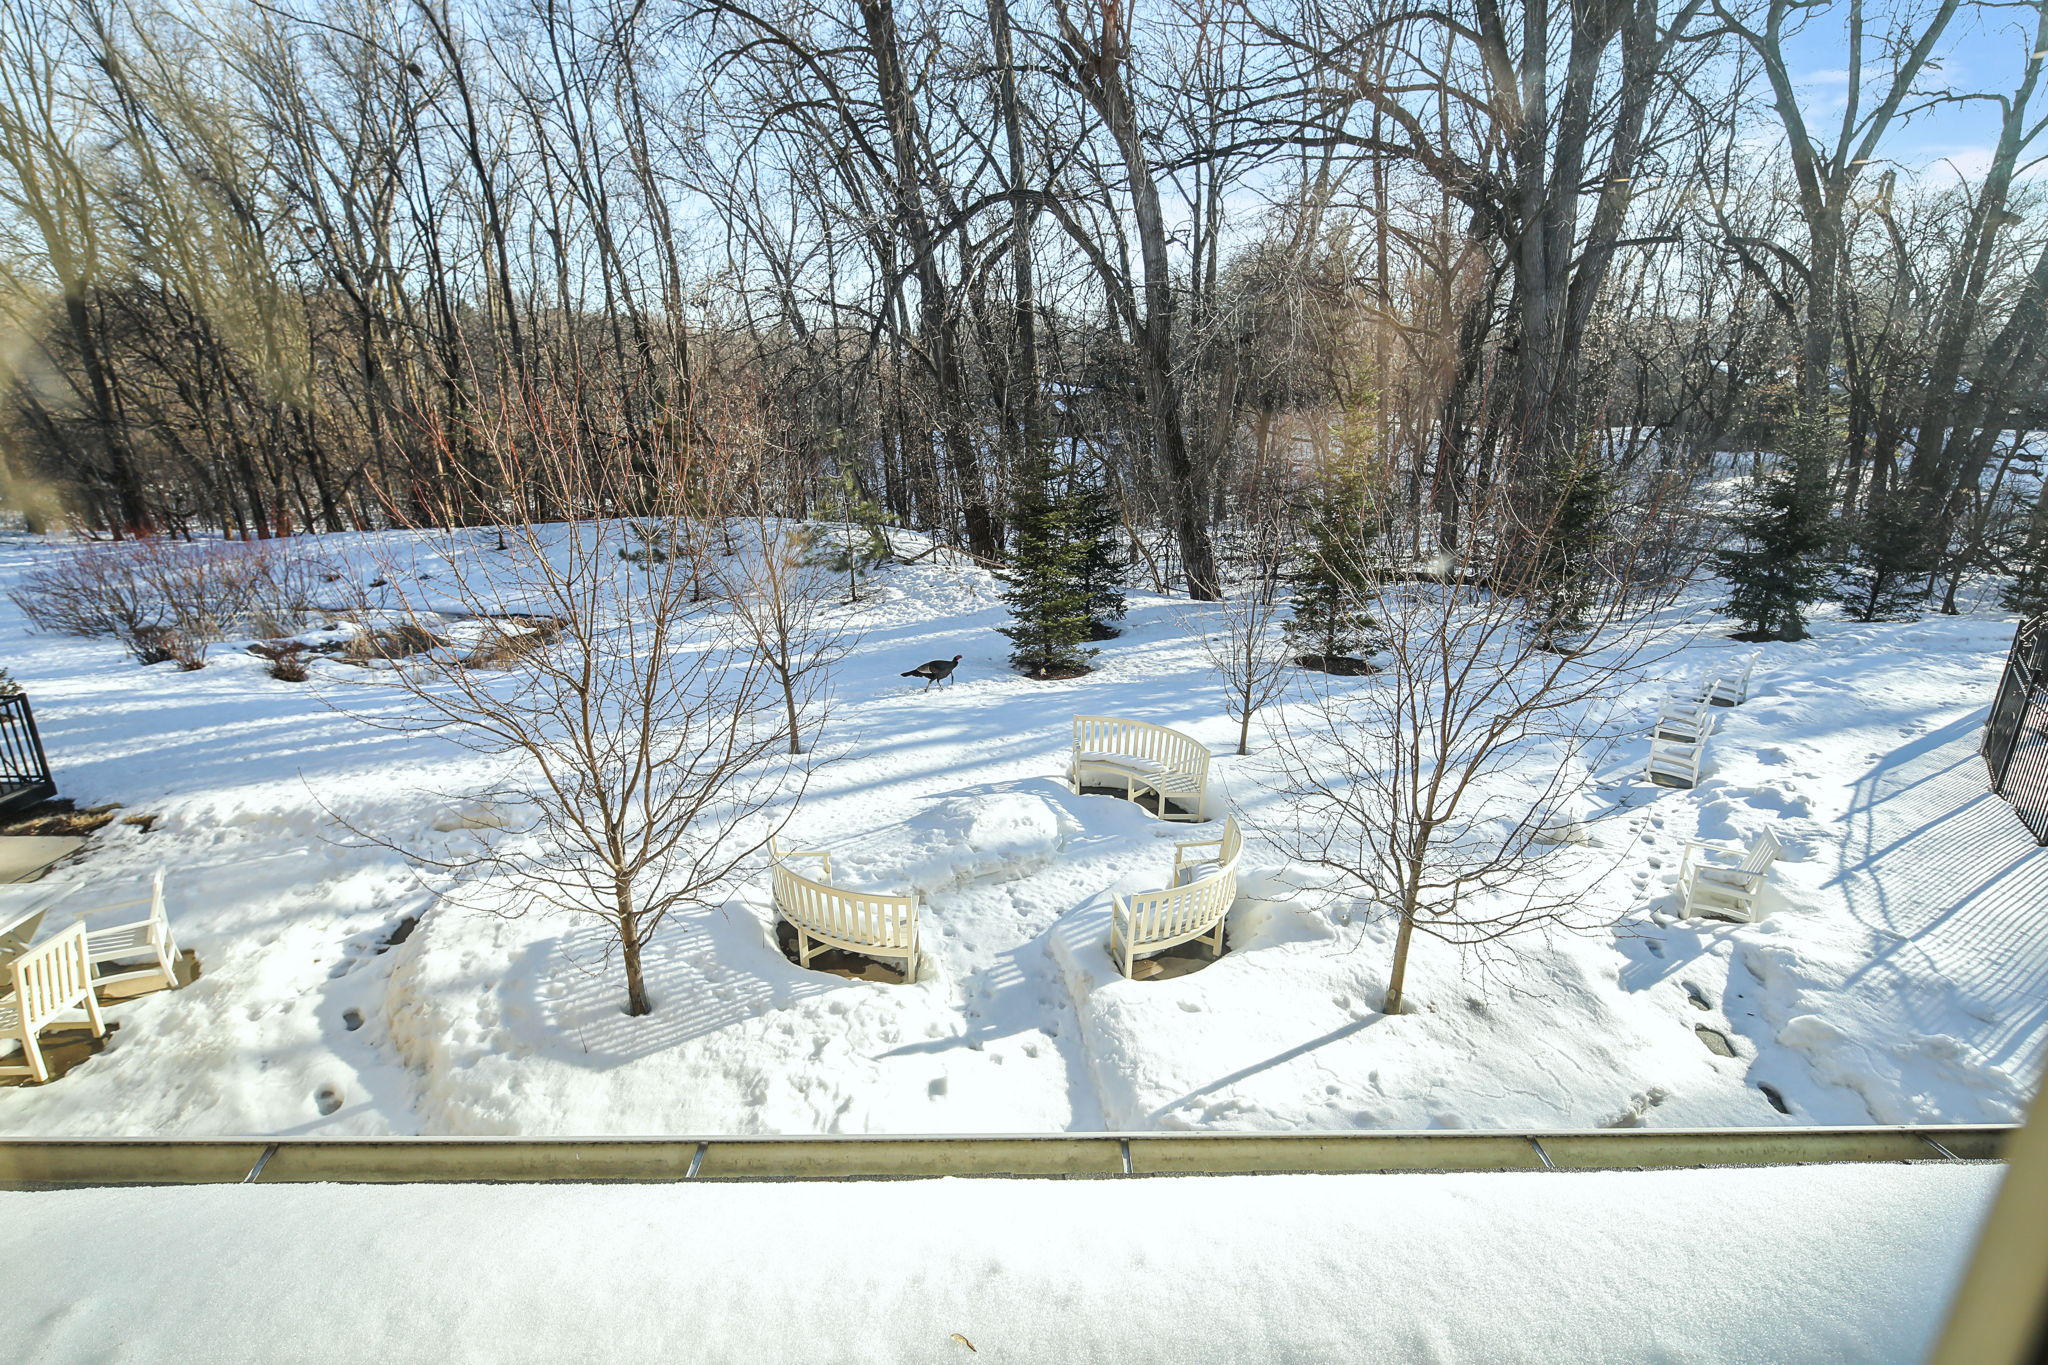 The outside view of a window peering out into an open snowy area, with white benches, and trees.